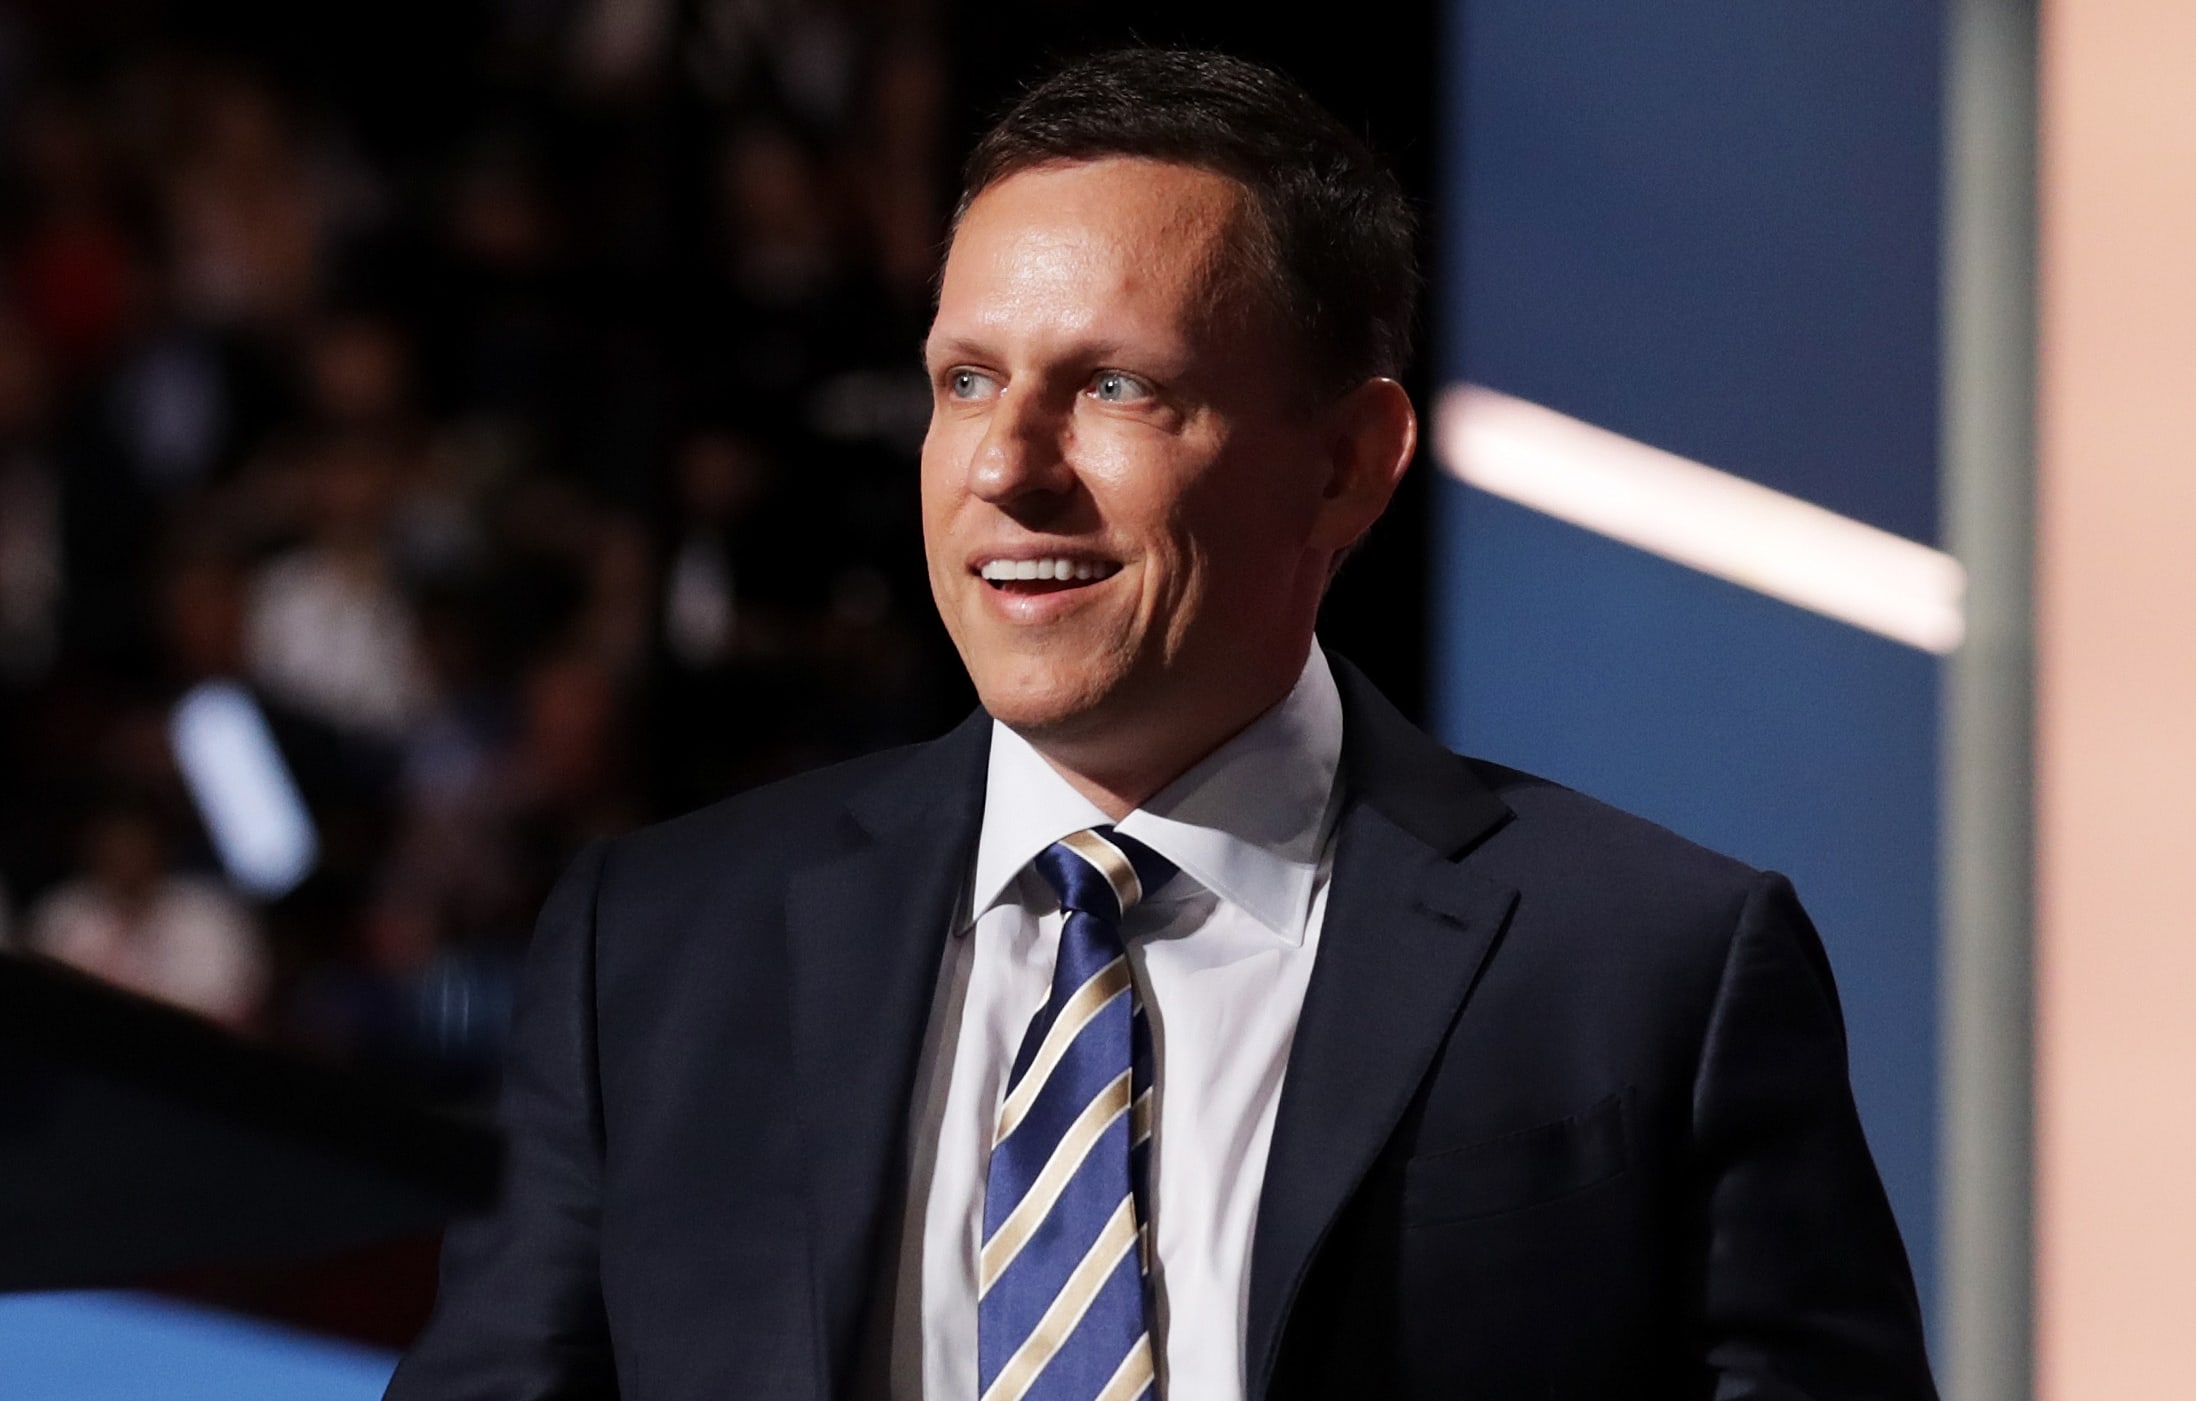 Peter Thiel, co-founder of PayPal, walks on stage to deliver a speech during the evening session on the fourth day of the Republican National Convention on July 21, 2016 at the Quicken Loans Arena in Cleveland, Ohio.